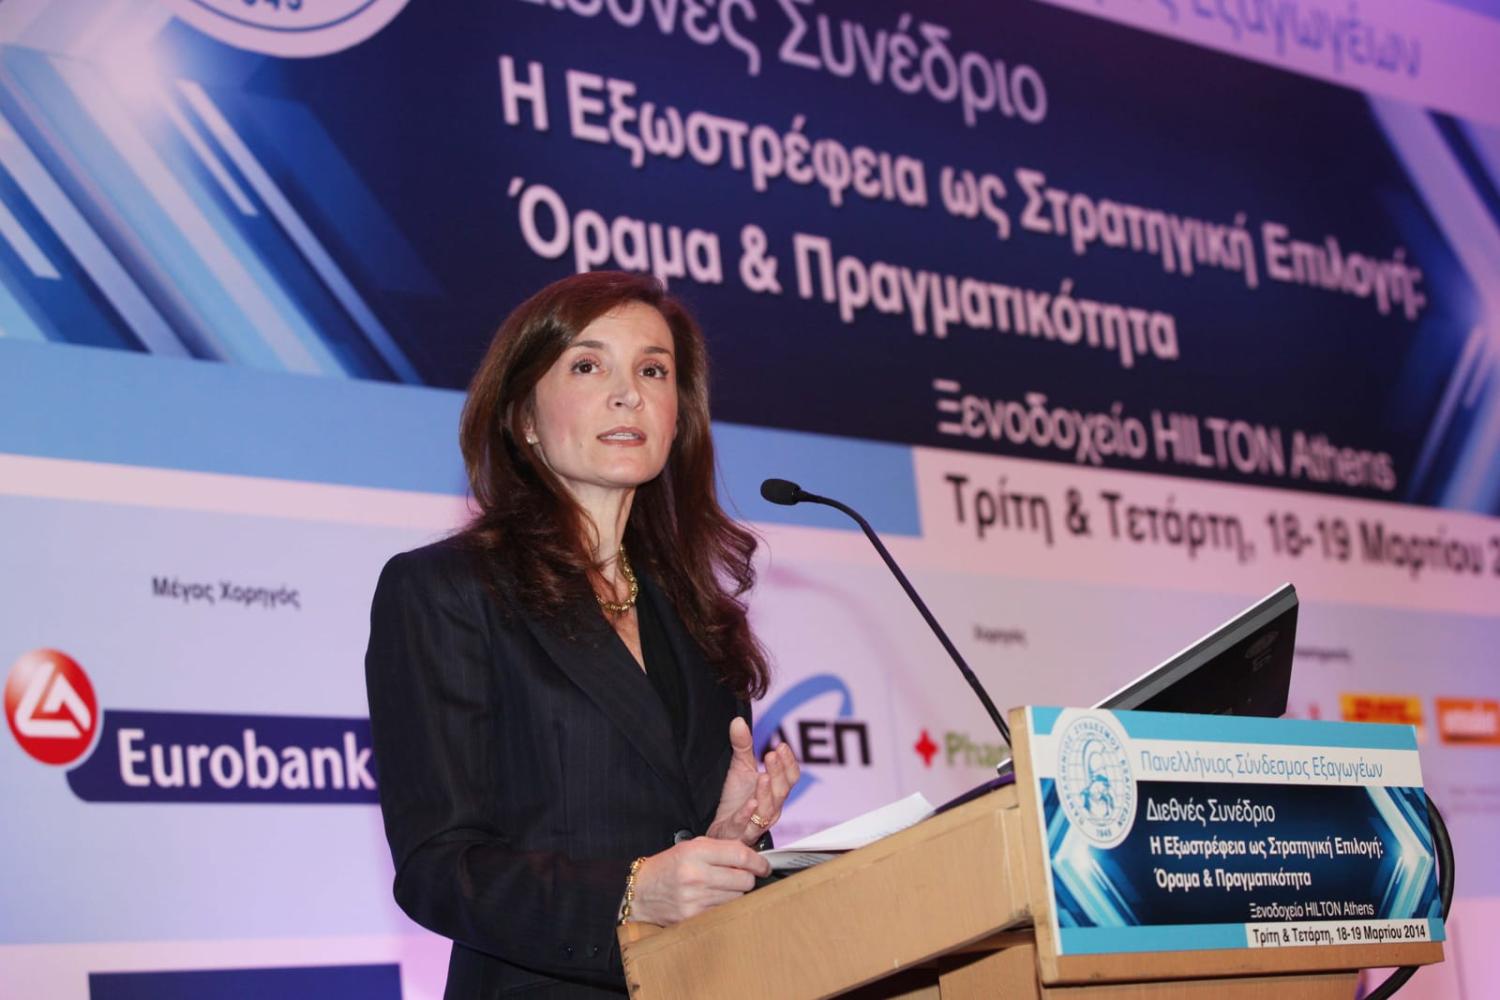 Jenny Bloomfield, as Australia's ambassador to Greece, Panhellenic Exporters Association conference, Athens 2014 (Supplied)